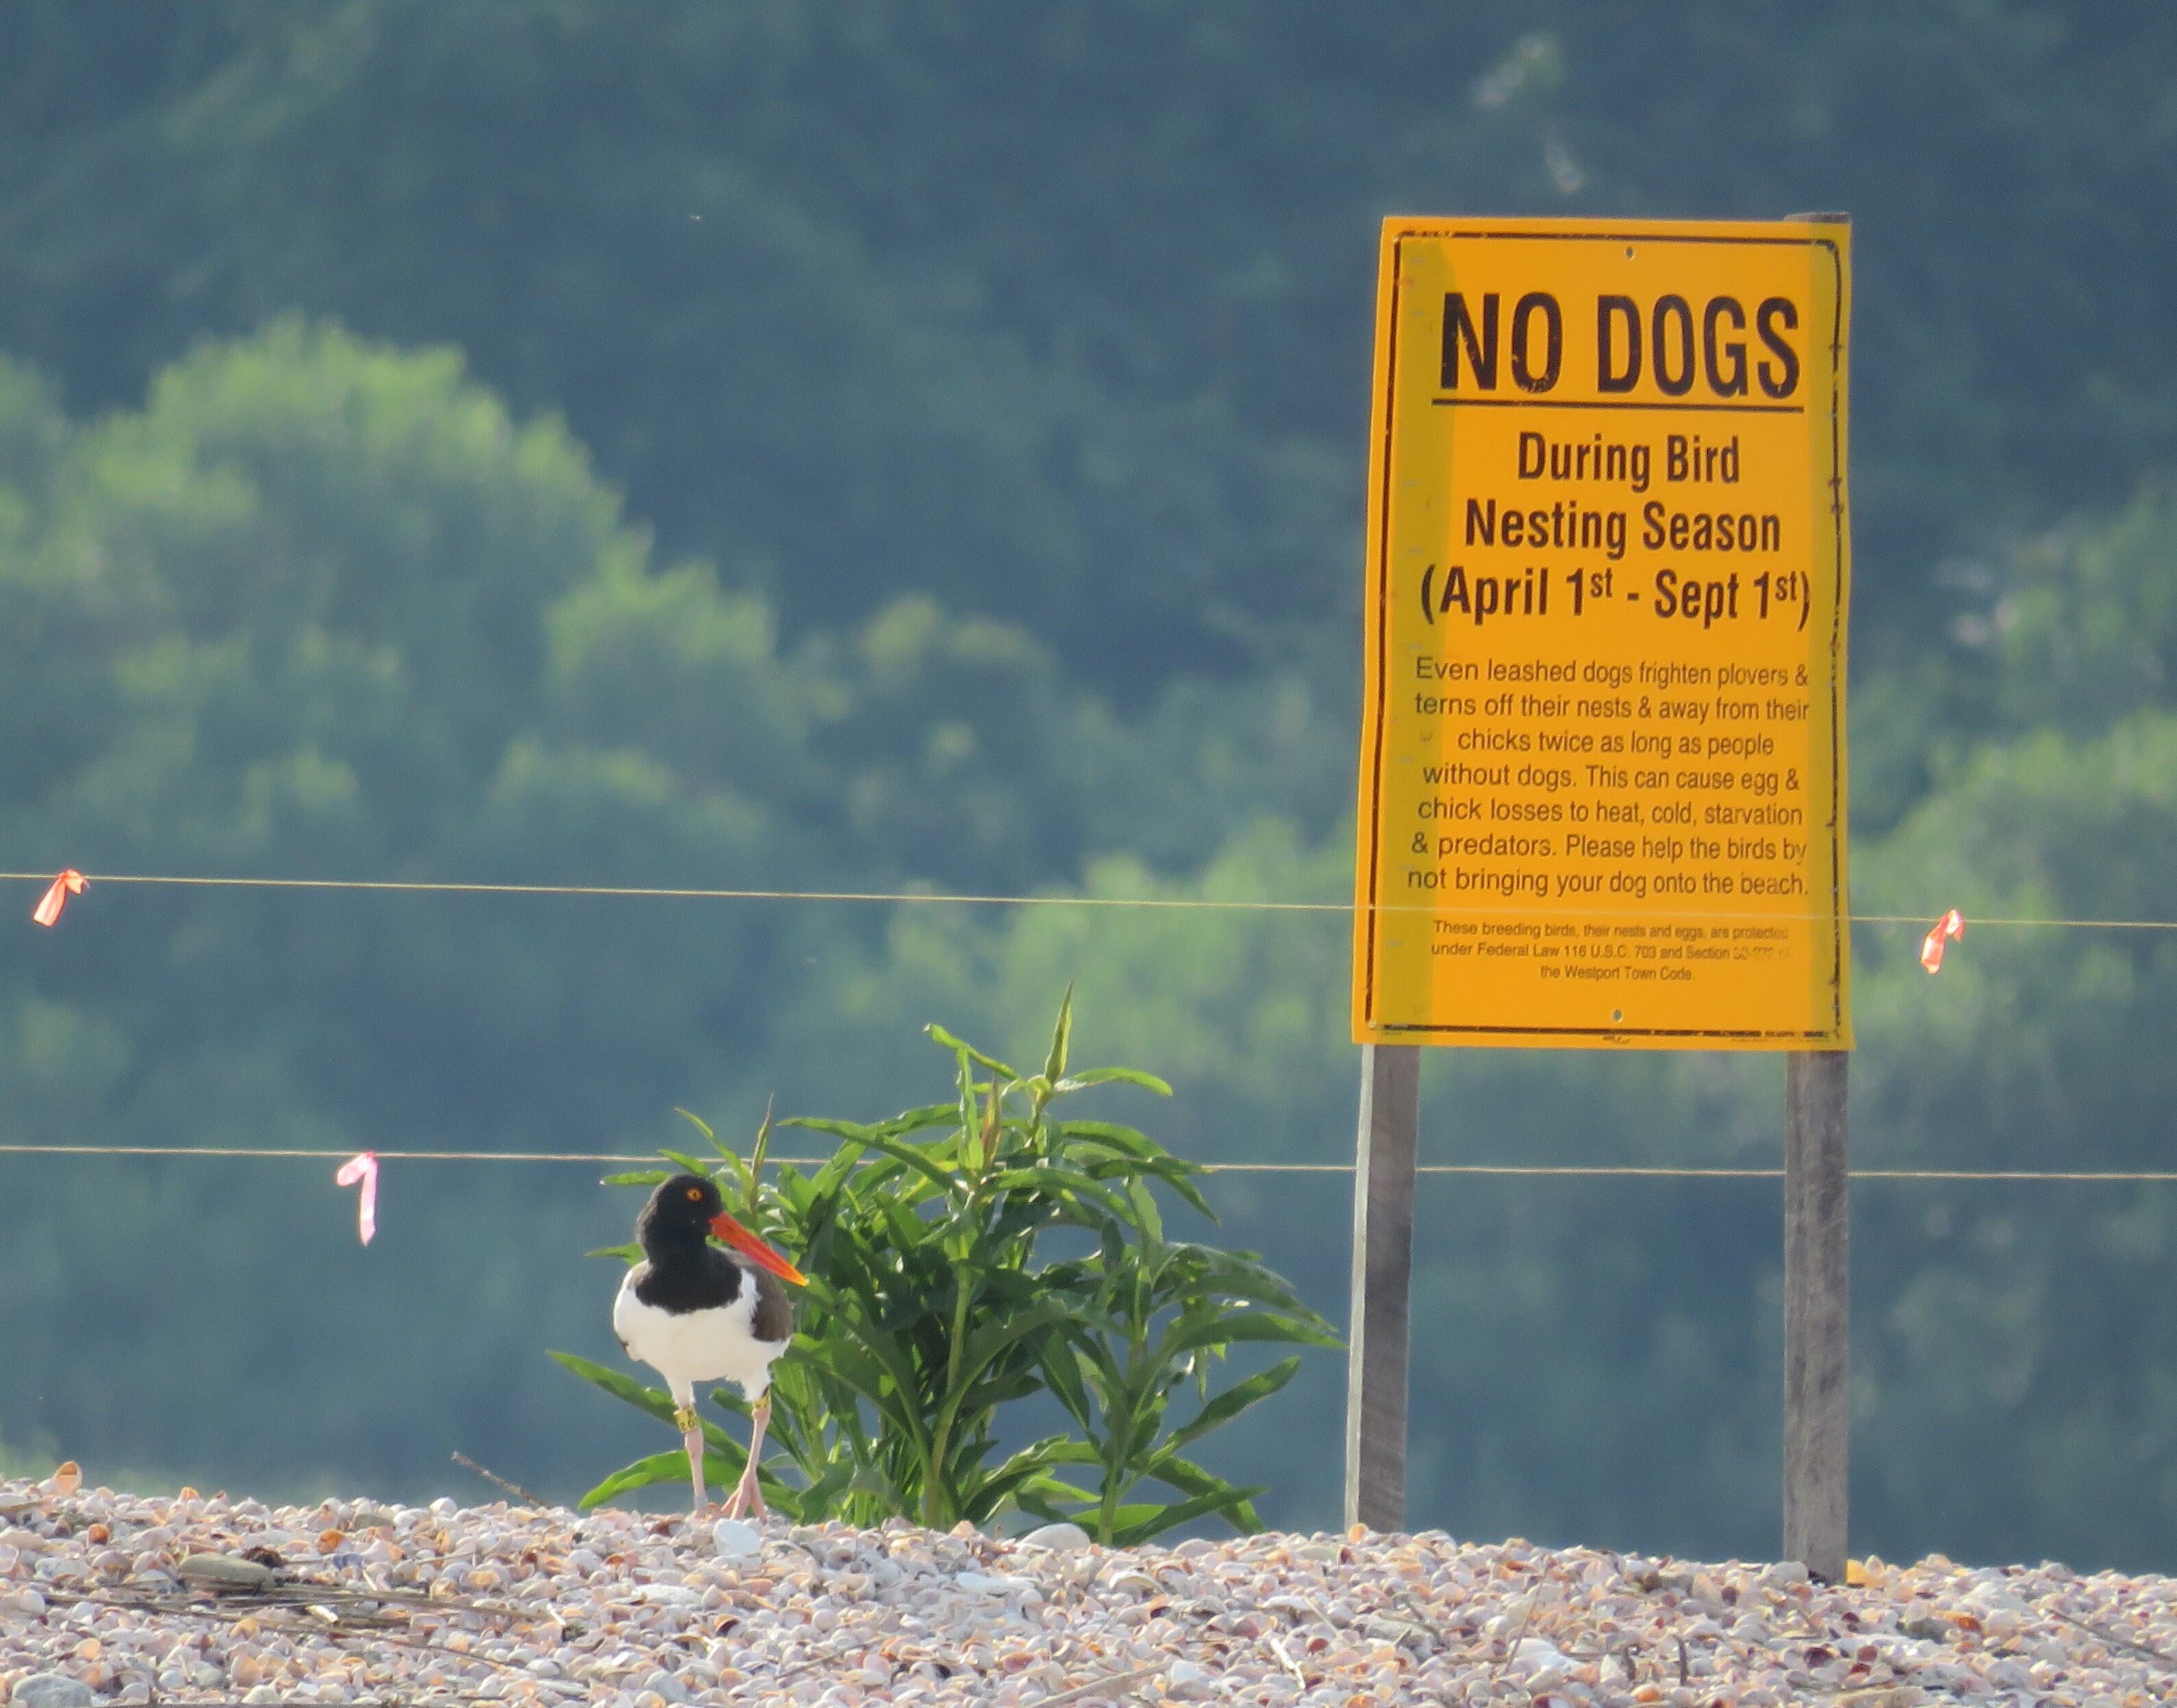 An American Oystercatcher adult, with a long, vivid orange beak, black head, and brown and white body, stands in front of a fence made of string indicating a protected area. There is a yellow sign that reads "No Dogs During Bird Nesting Season"